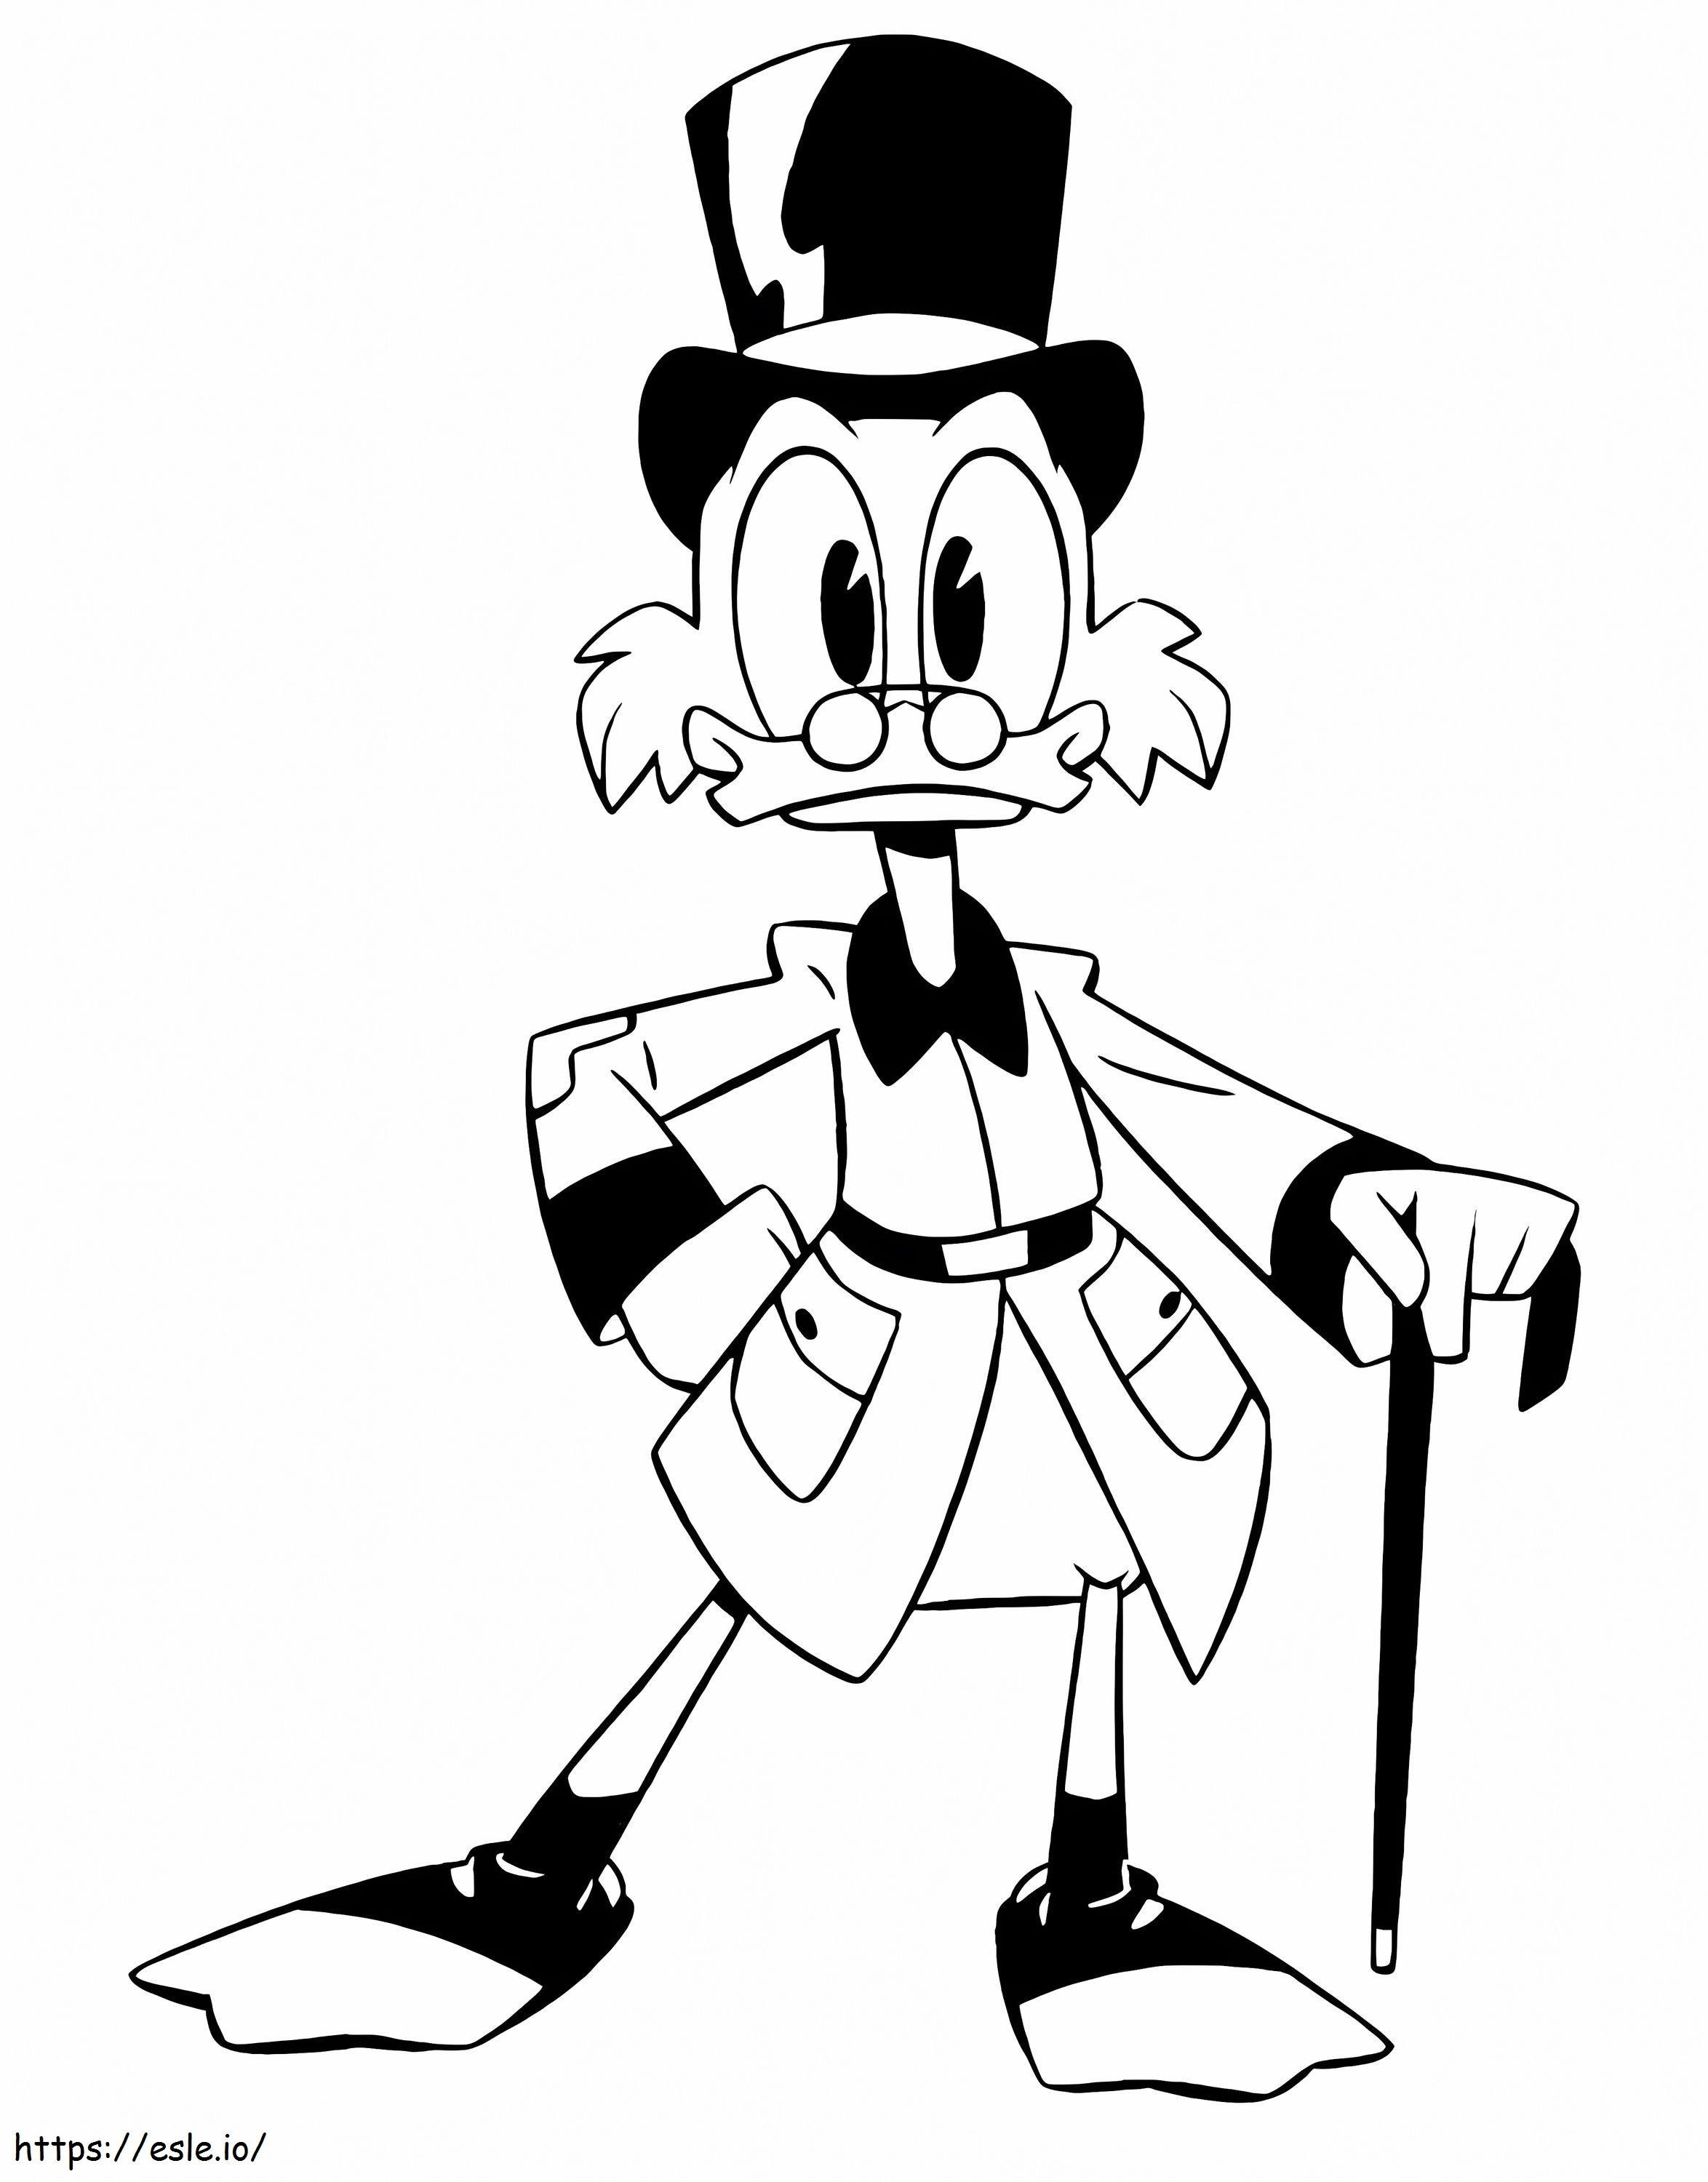 Funny Scrooge McDuck coloring page